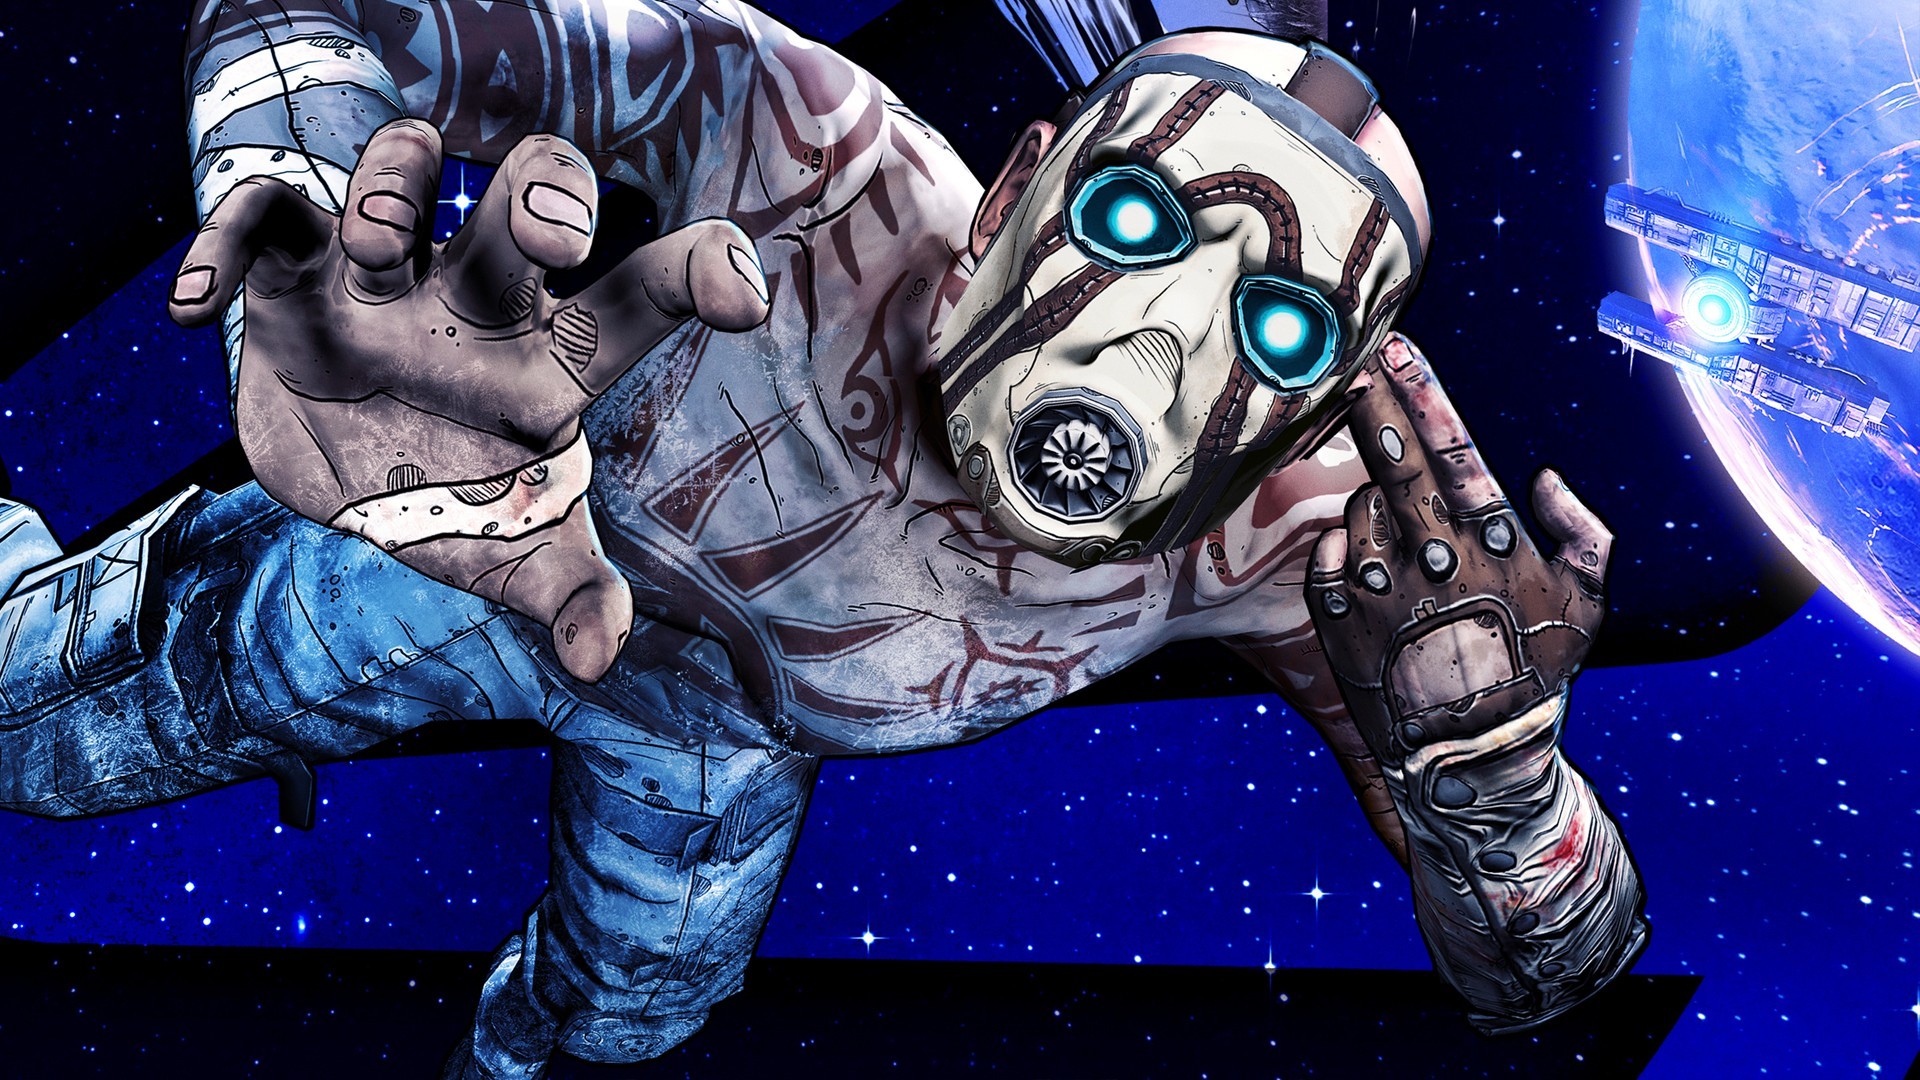 1920x1080 Wallpaper from Borderlands: The Pre-Sequel!